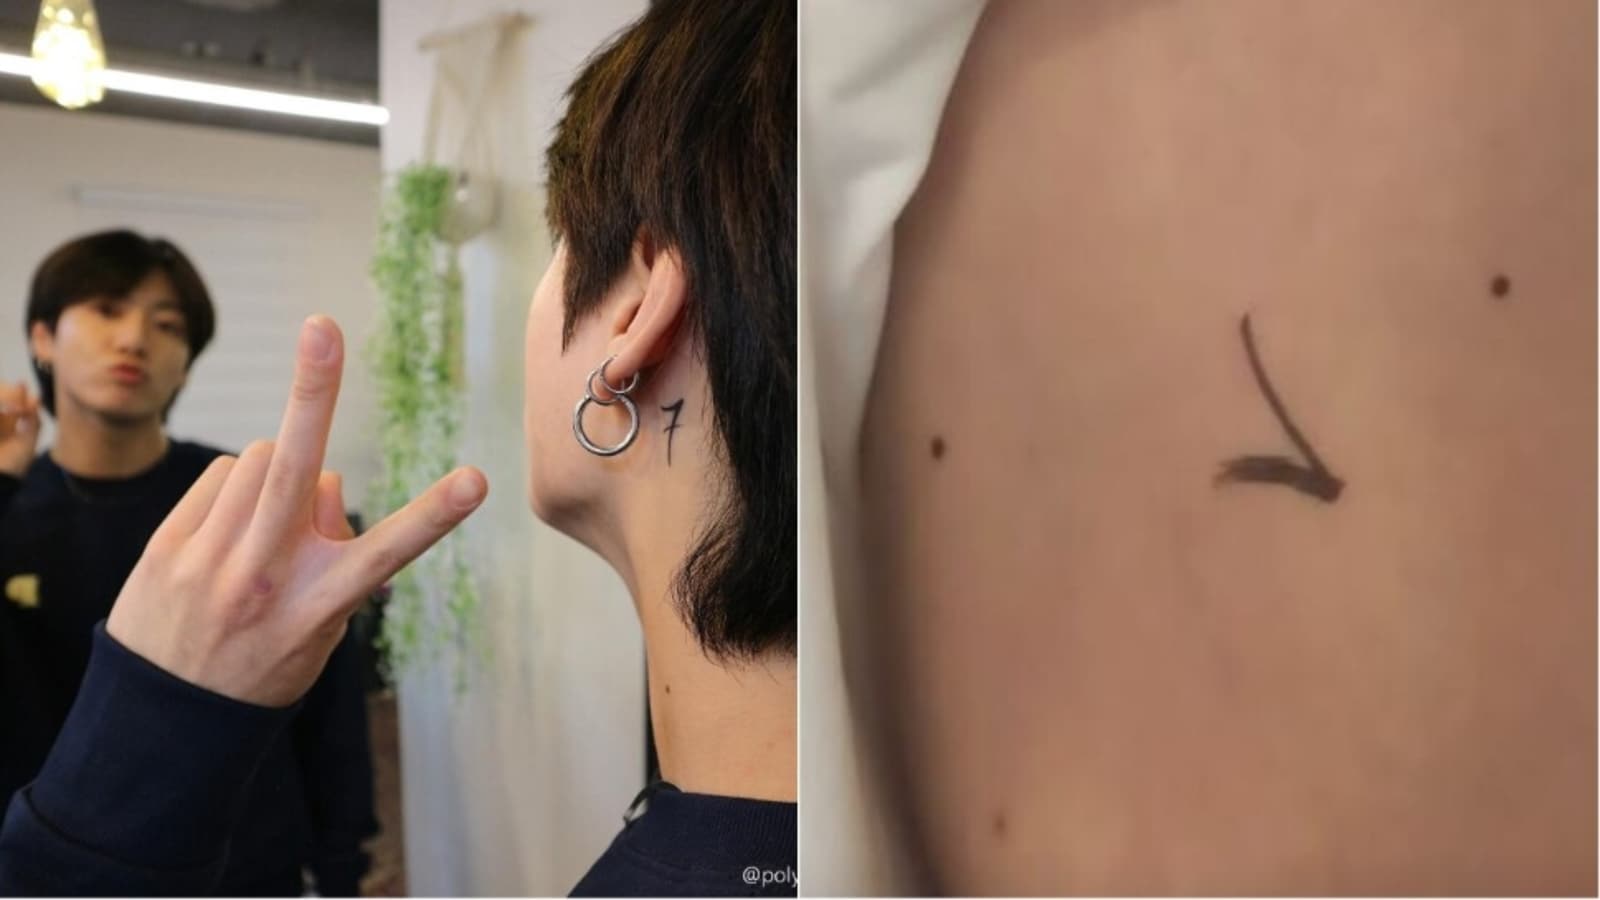 BTS: Jungkook flaunts new friendship tattoo behind ear, gives glimpse of full sleeve; V gets '7' inked on arm. See pics